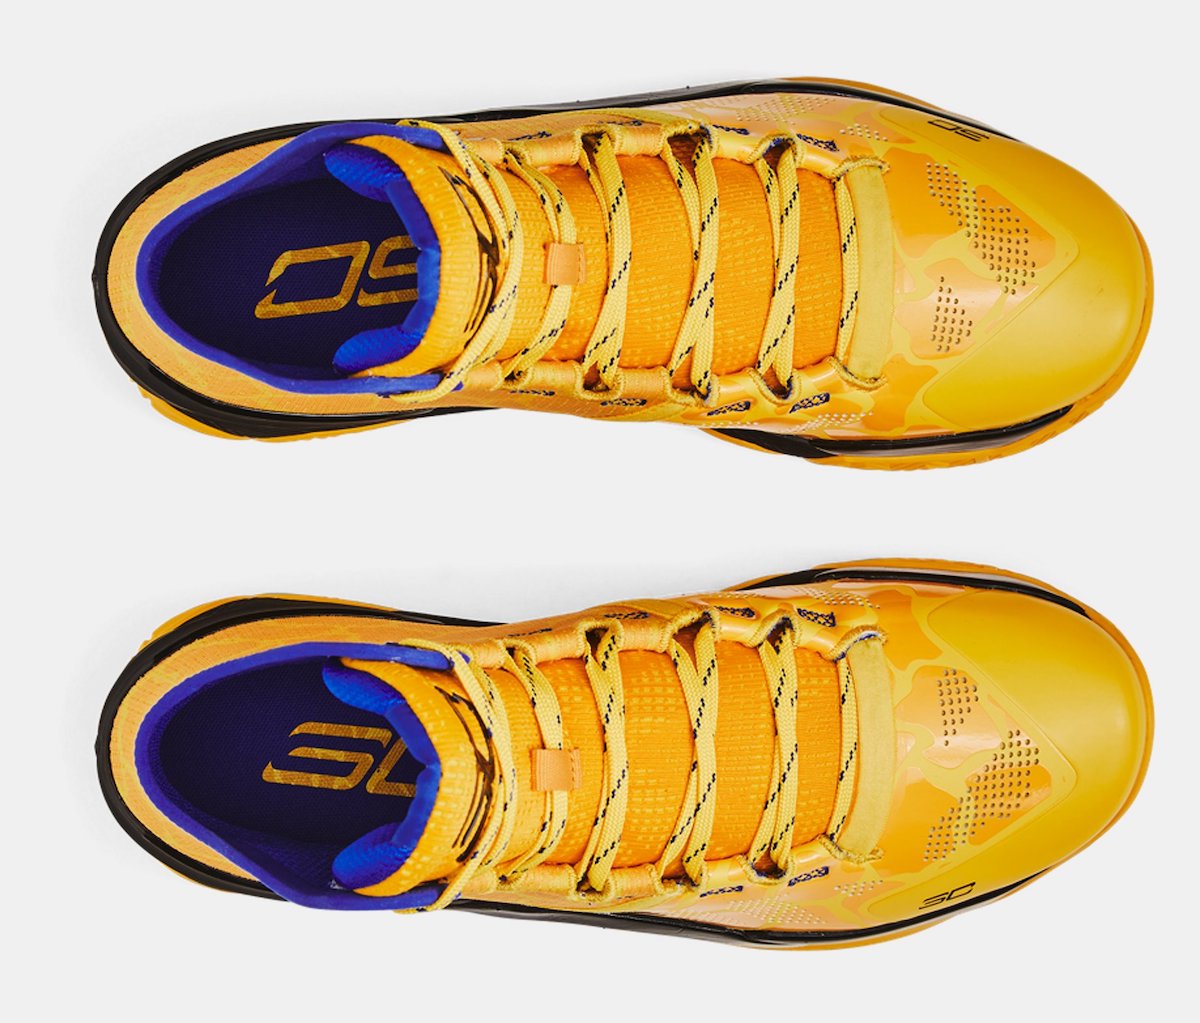 Under Armour Curry 2 Double Bang 3026281-700 Release Date Info